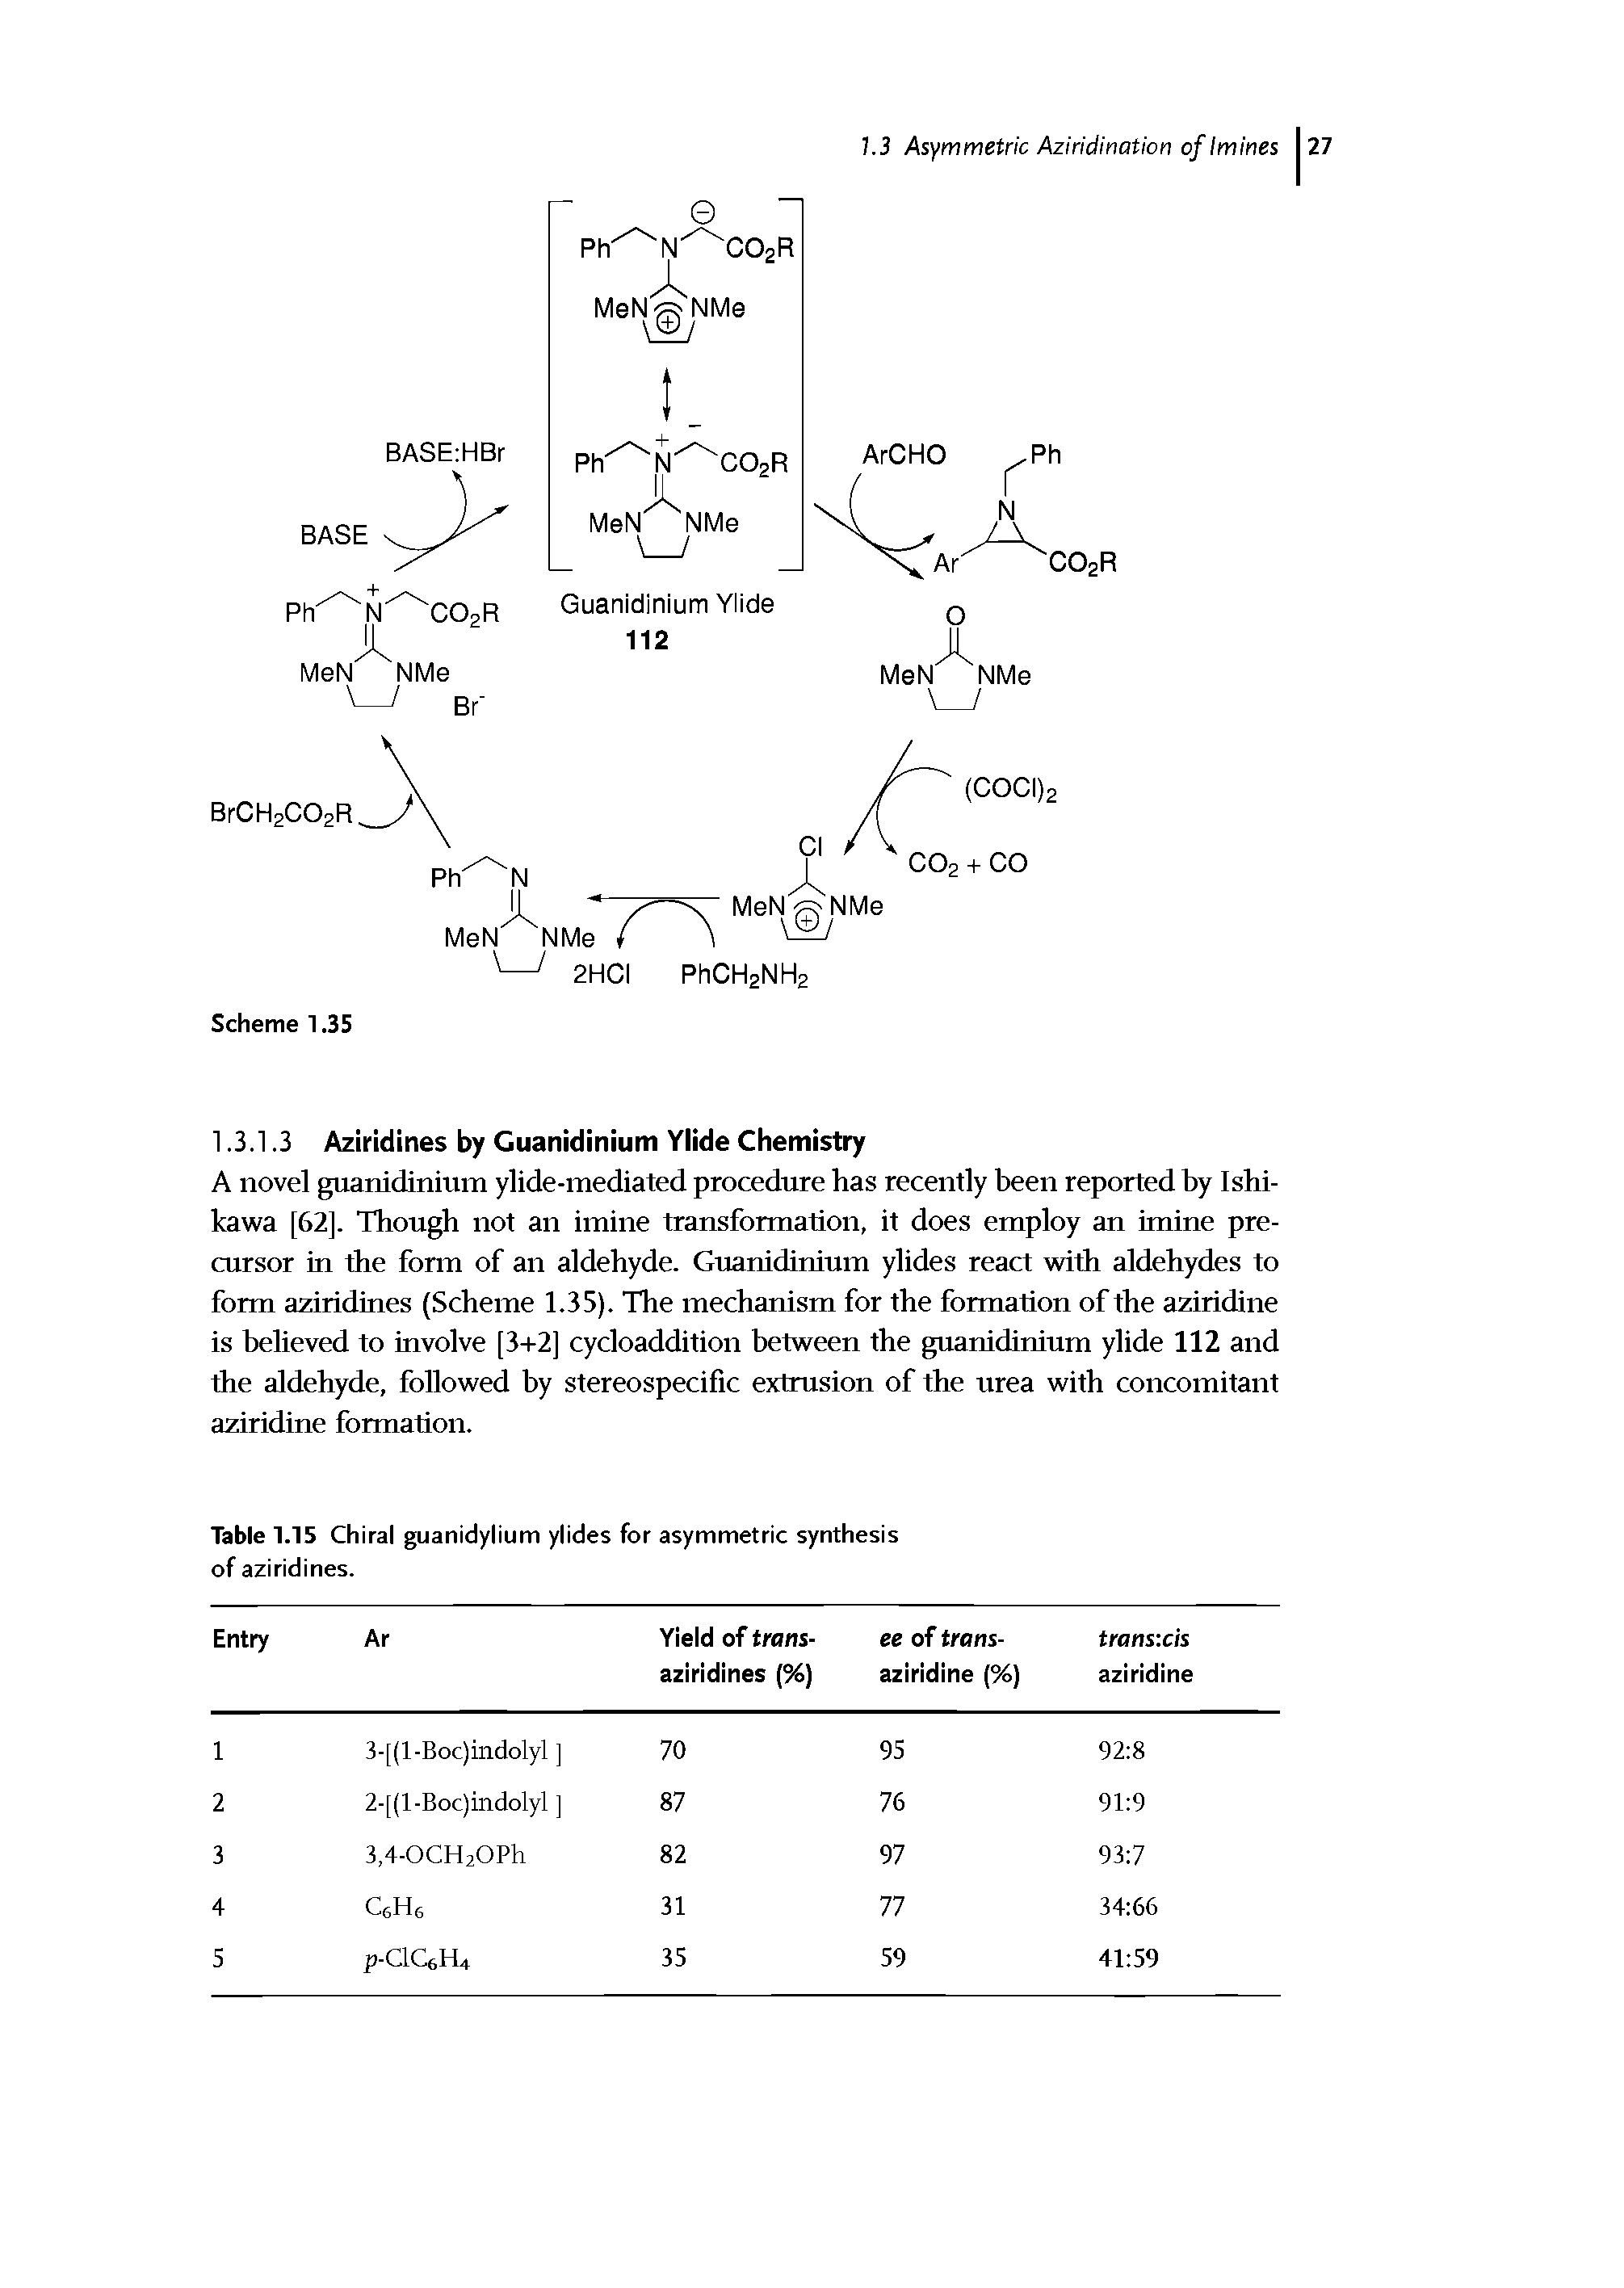 Table 1.15 Chiral guanidylium ylides for asymmetric synthesis of aziridines.